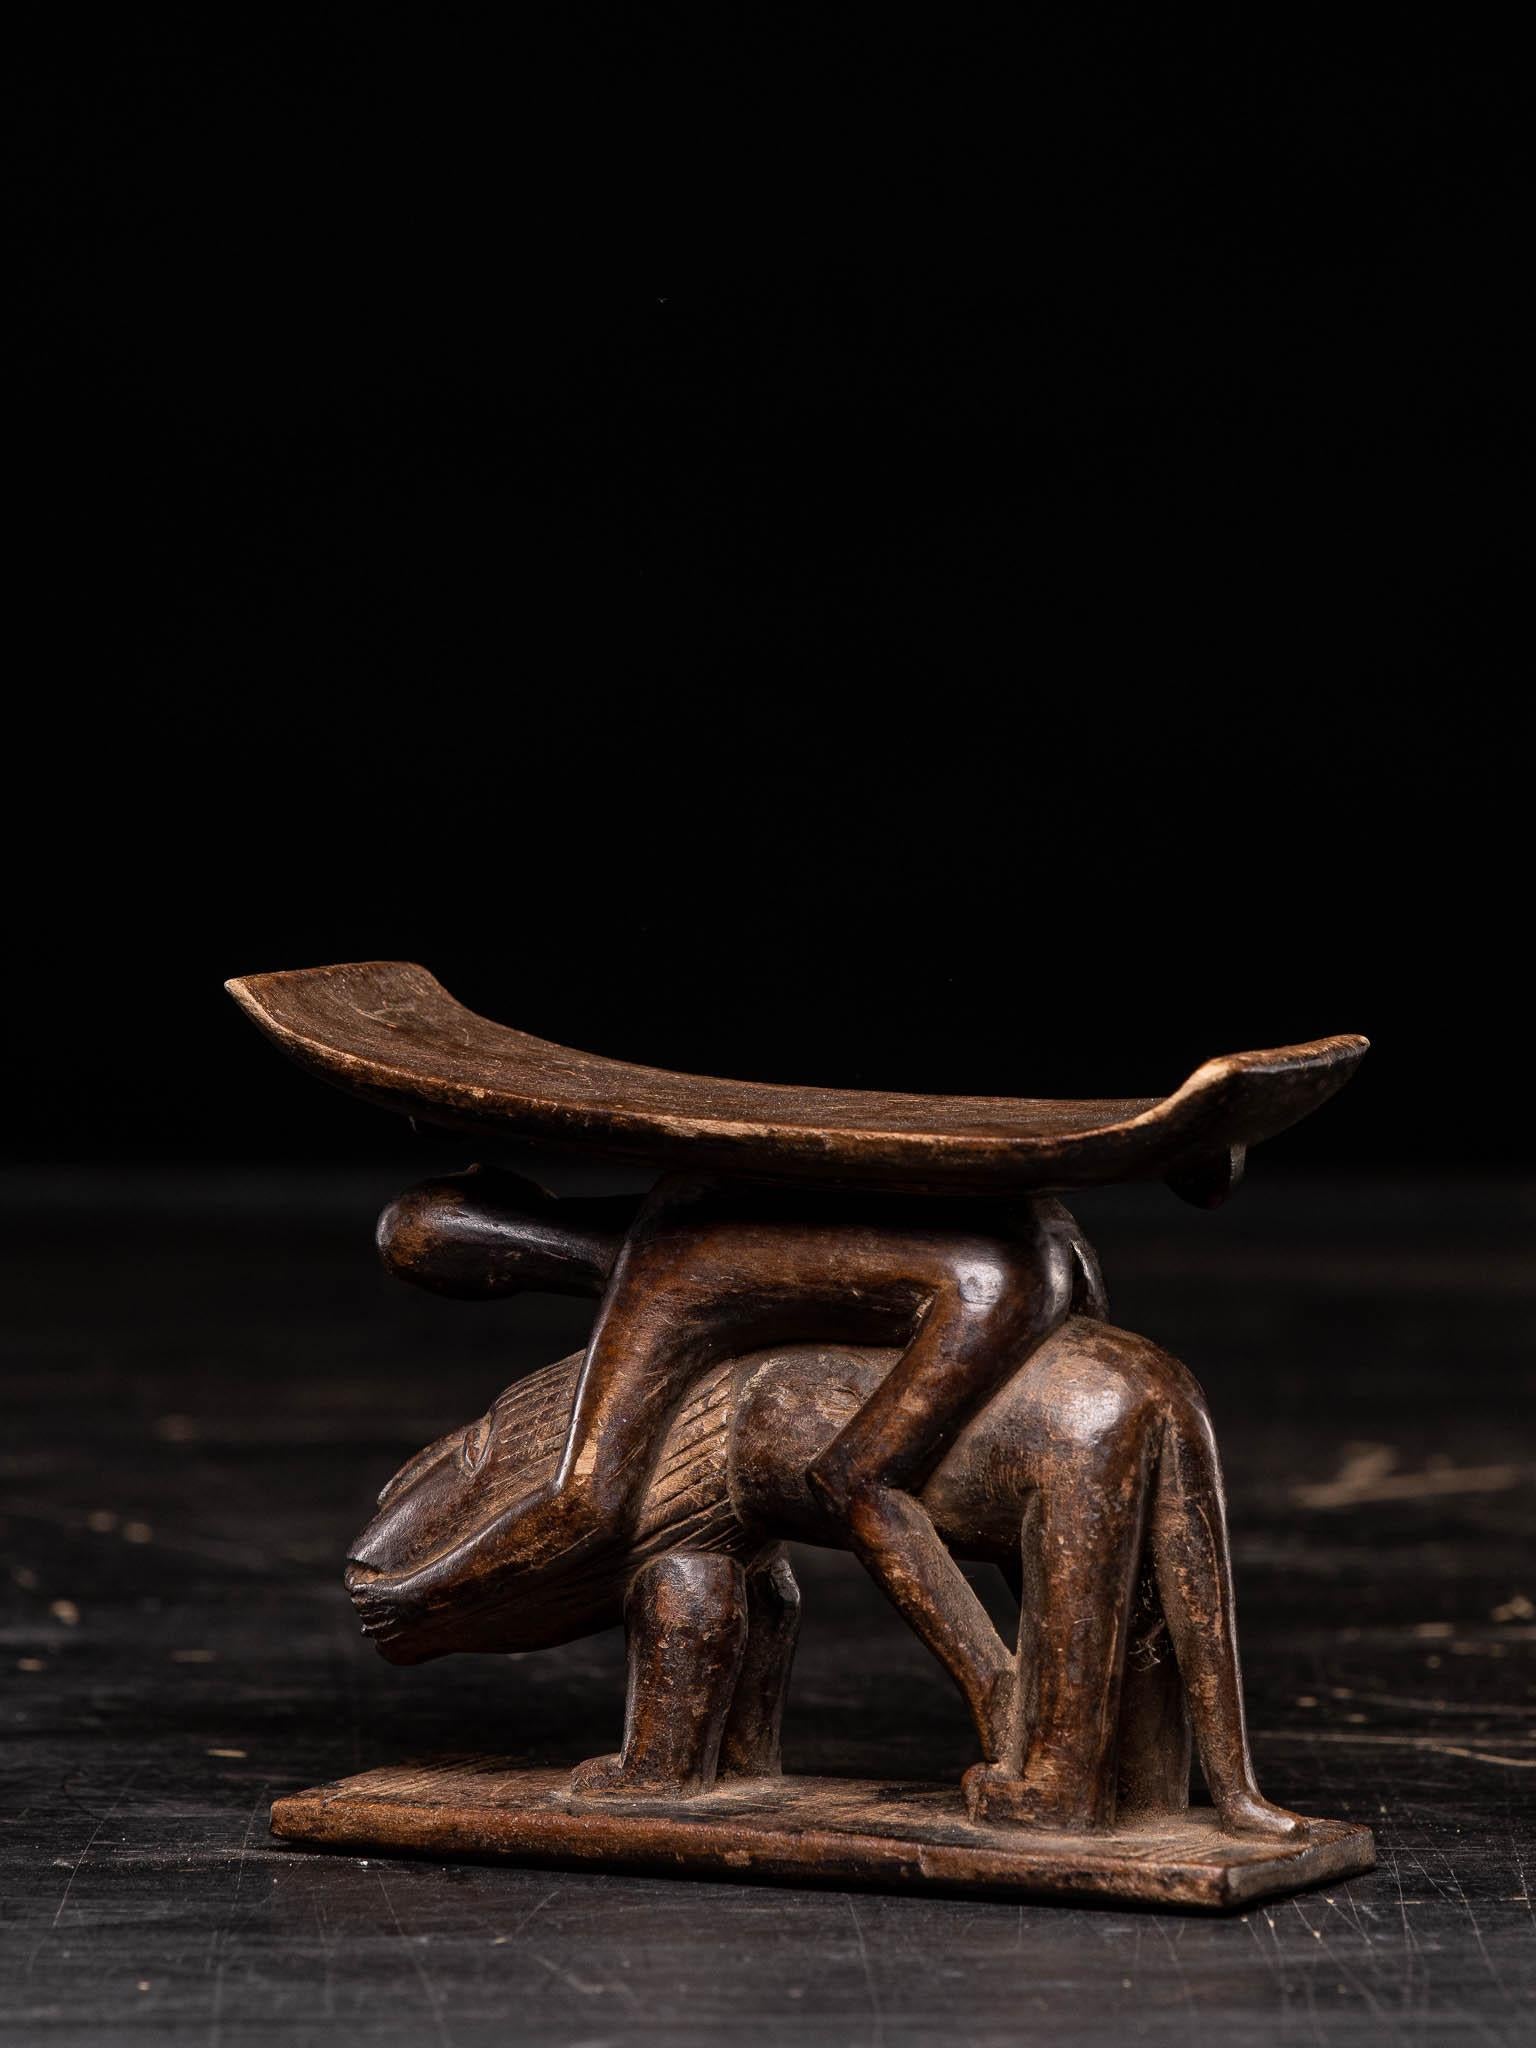 Ashanti Headrest Stool Carved Wood Tribal Art Ghana Africa

Carved from a single piece of wood, the African Ashanti head rest, Ghana, has a curved top raised on a pedestals depicting a man riding a lion.